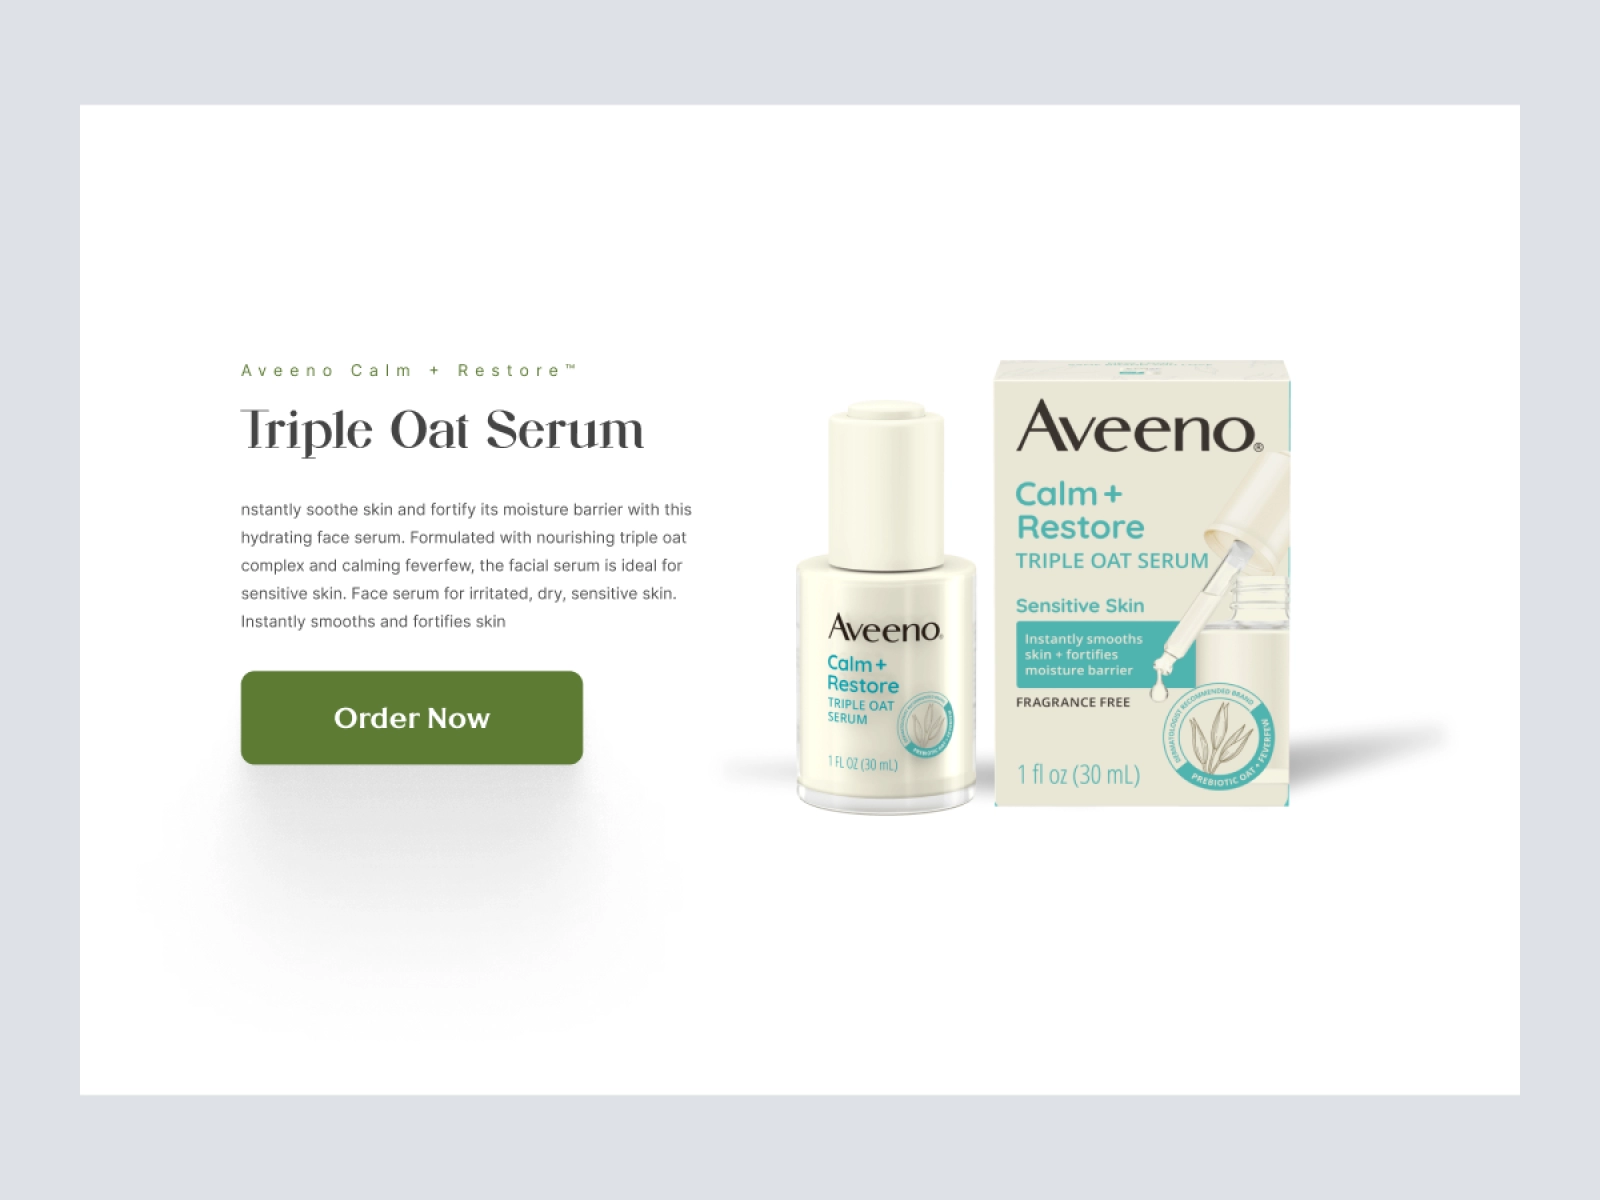 Aveeno - Cosmetics and Beauty Store for Figma and Adobe XD - screen 4